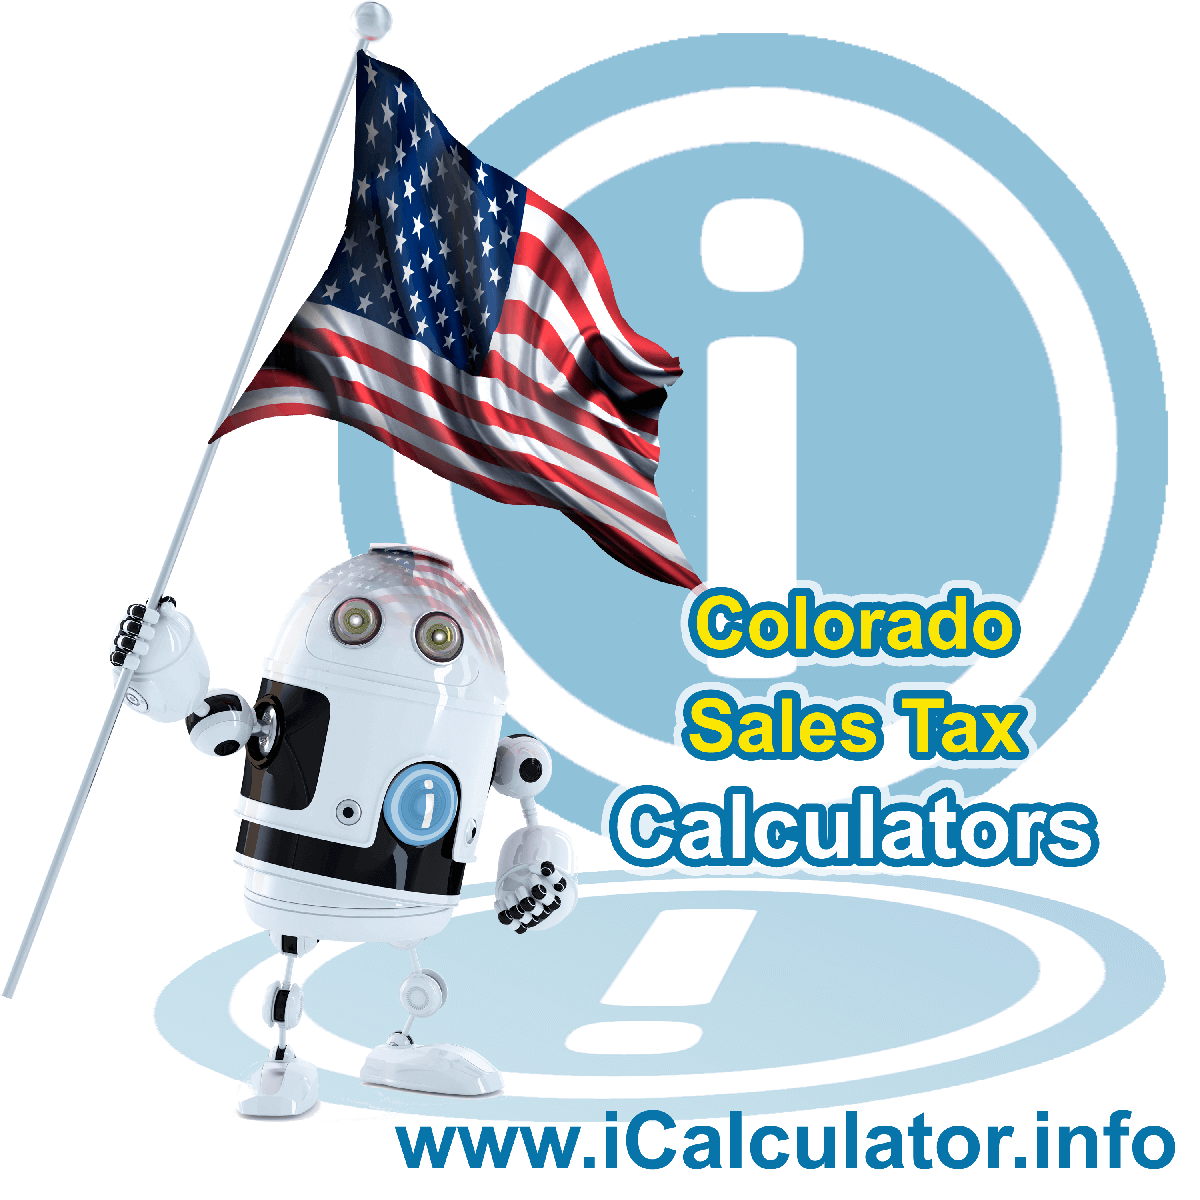 Avon Sales Rates: This image illustrates a calculator robot calculating Avon sales tax manually using the Avon Sales Tax Formula. You can use this information to calculate Avon Sales Tax manually or use the Avon Sales Tax Calculator to calculate sales tax online.